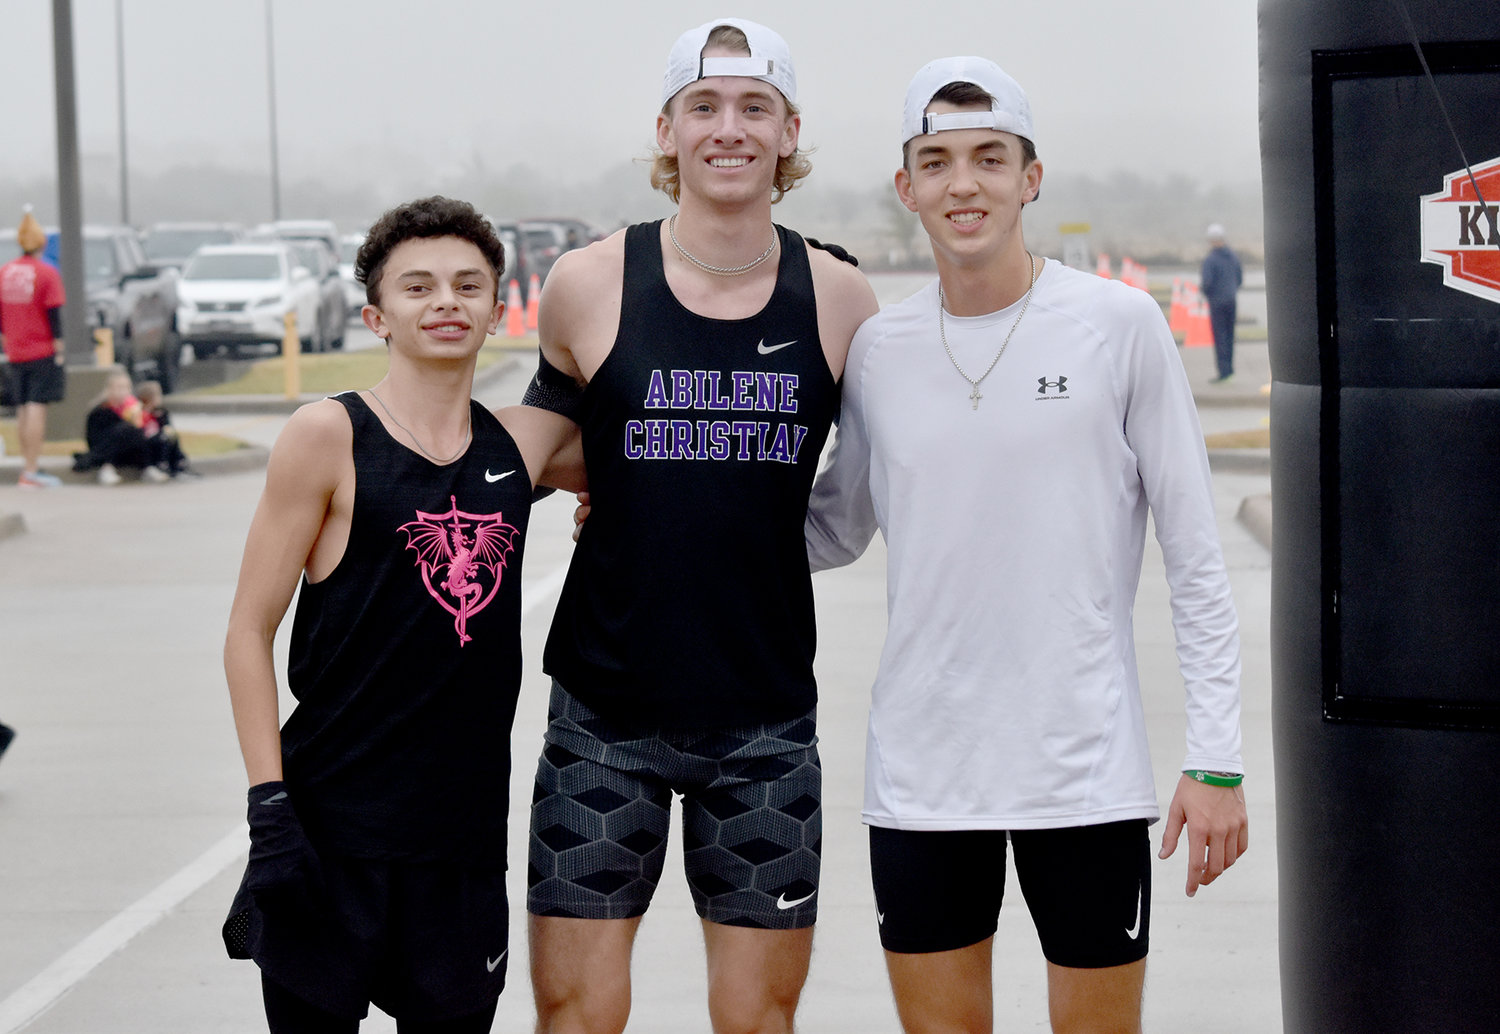 Top finishers of the 5K were (from left) Aledo High School student Jack Fink (third); Abilene Christian University runner and AHS graduate Cooper Goggans (first); and Texas A&M runner and AHS graduate Bryceson Boss (second).